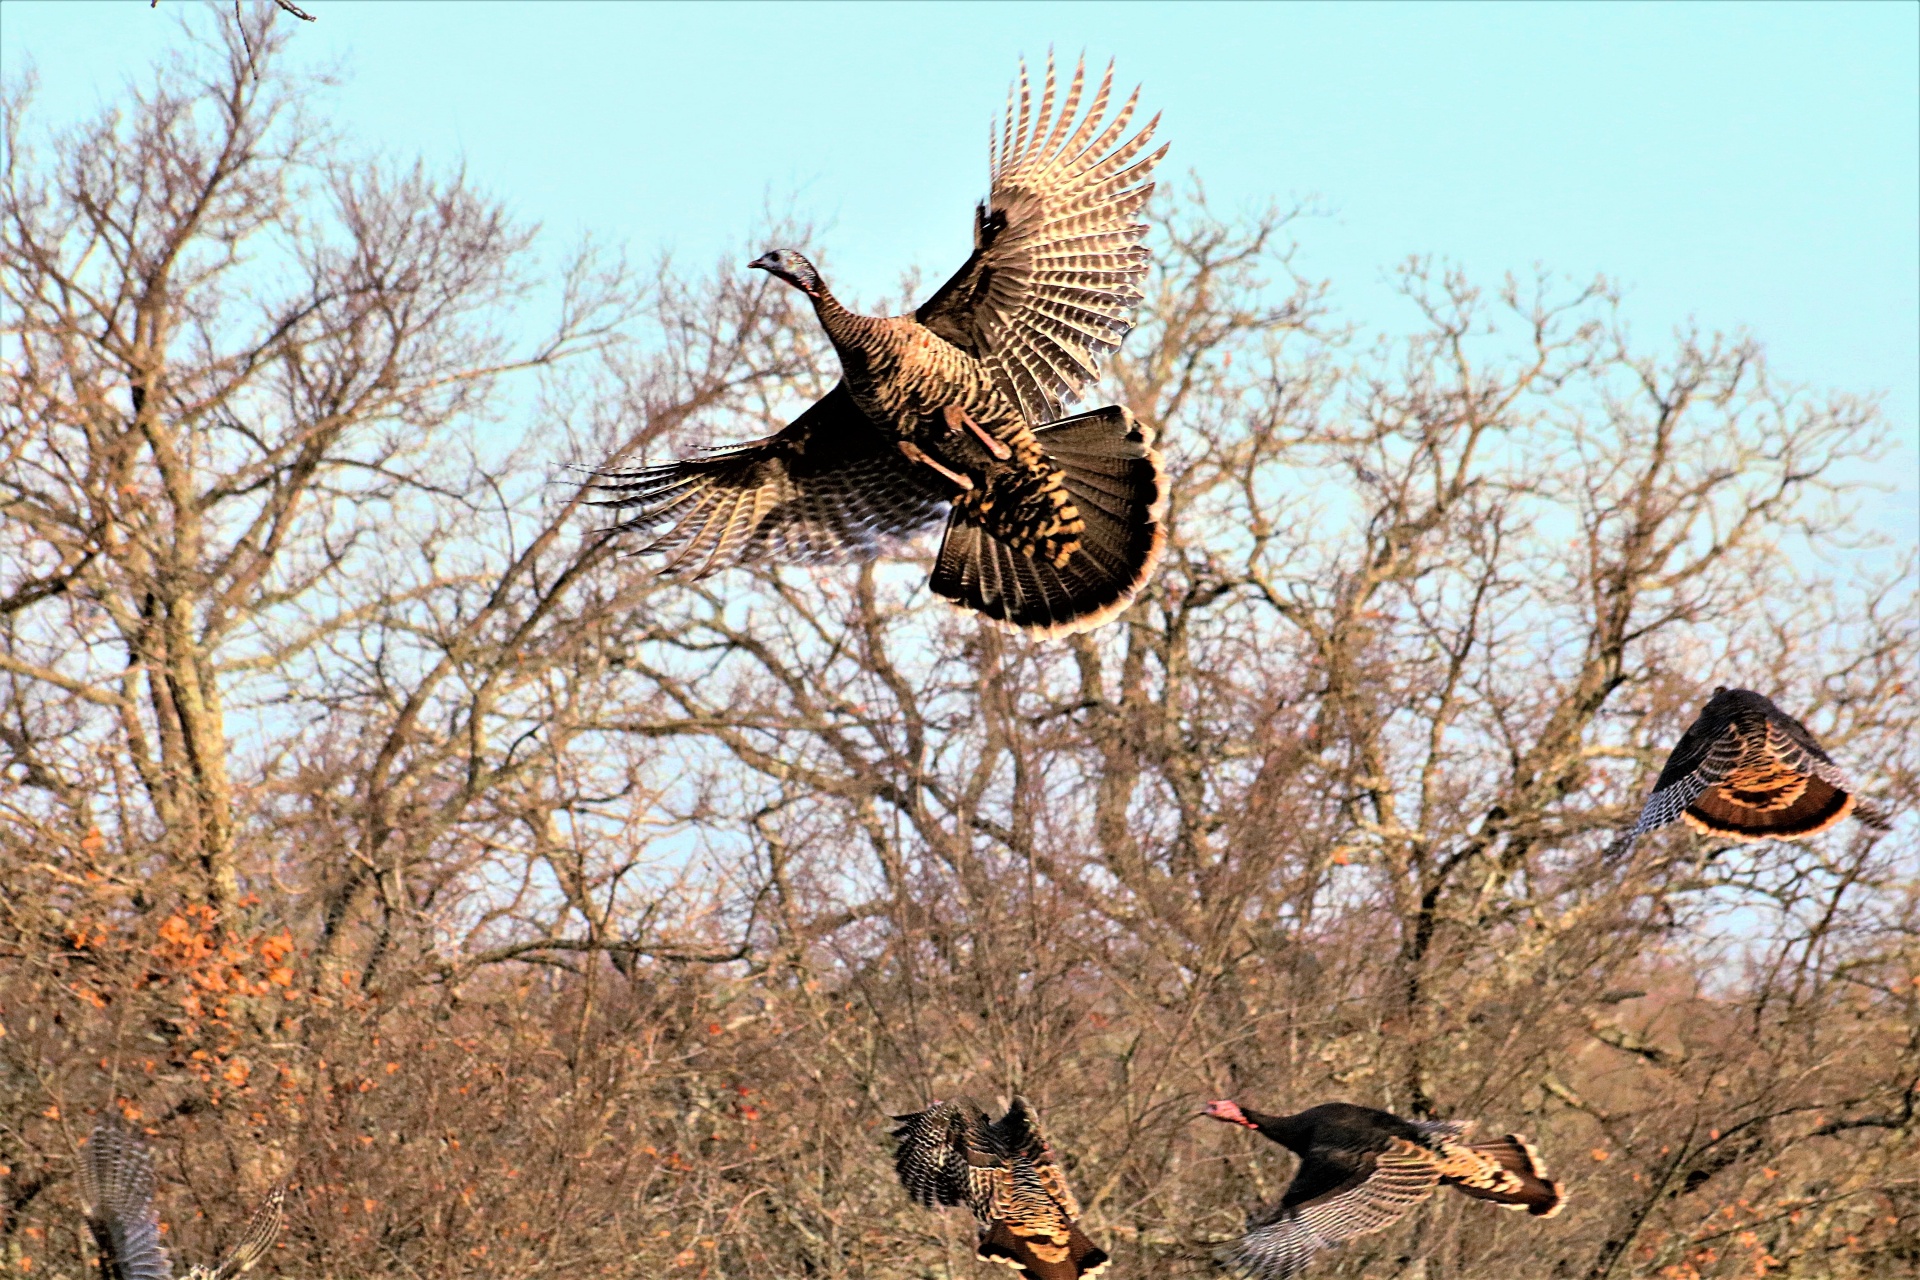 Several wild turkey taking flight on a blue sky background in late fall.